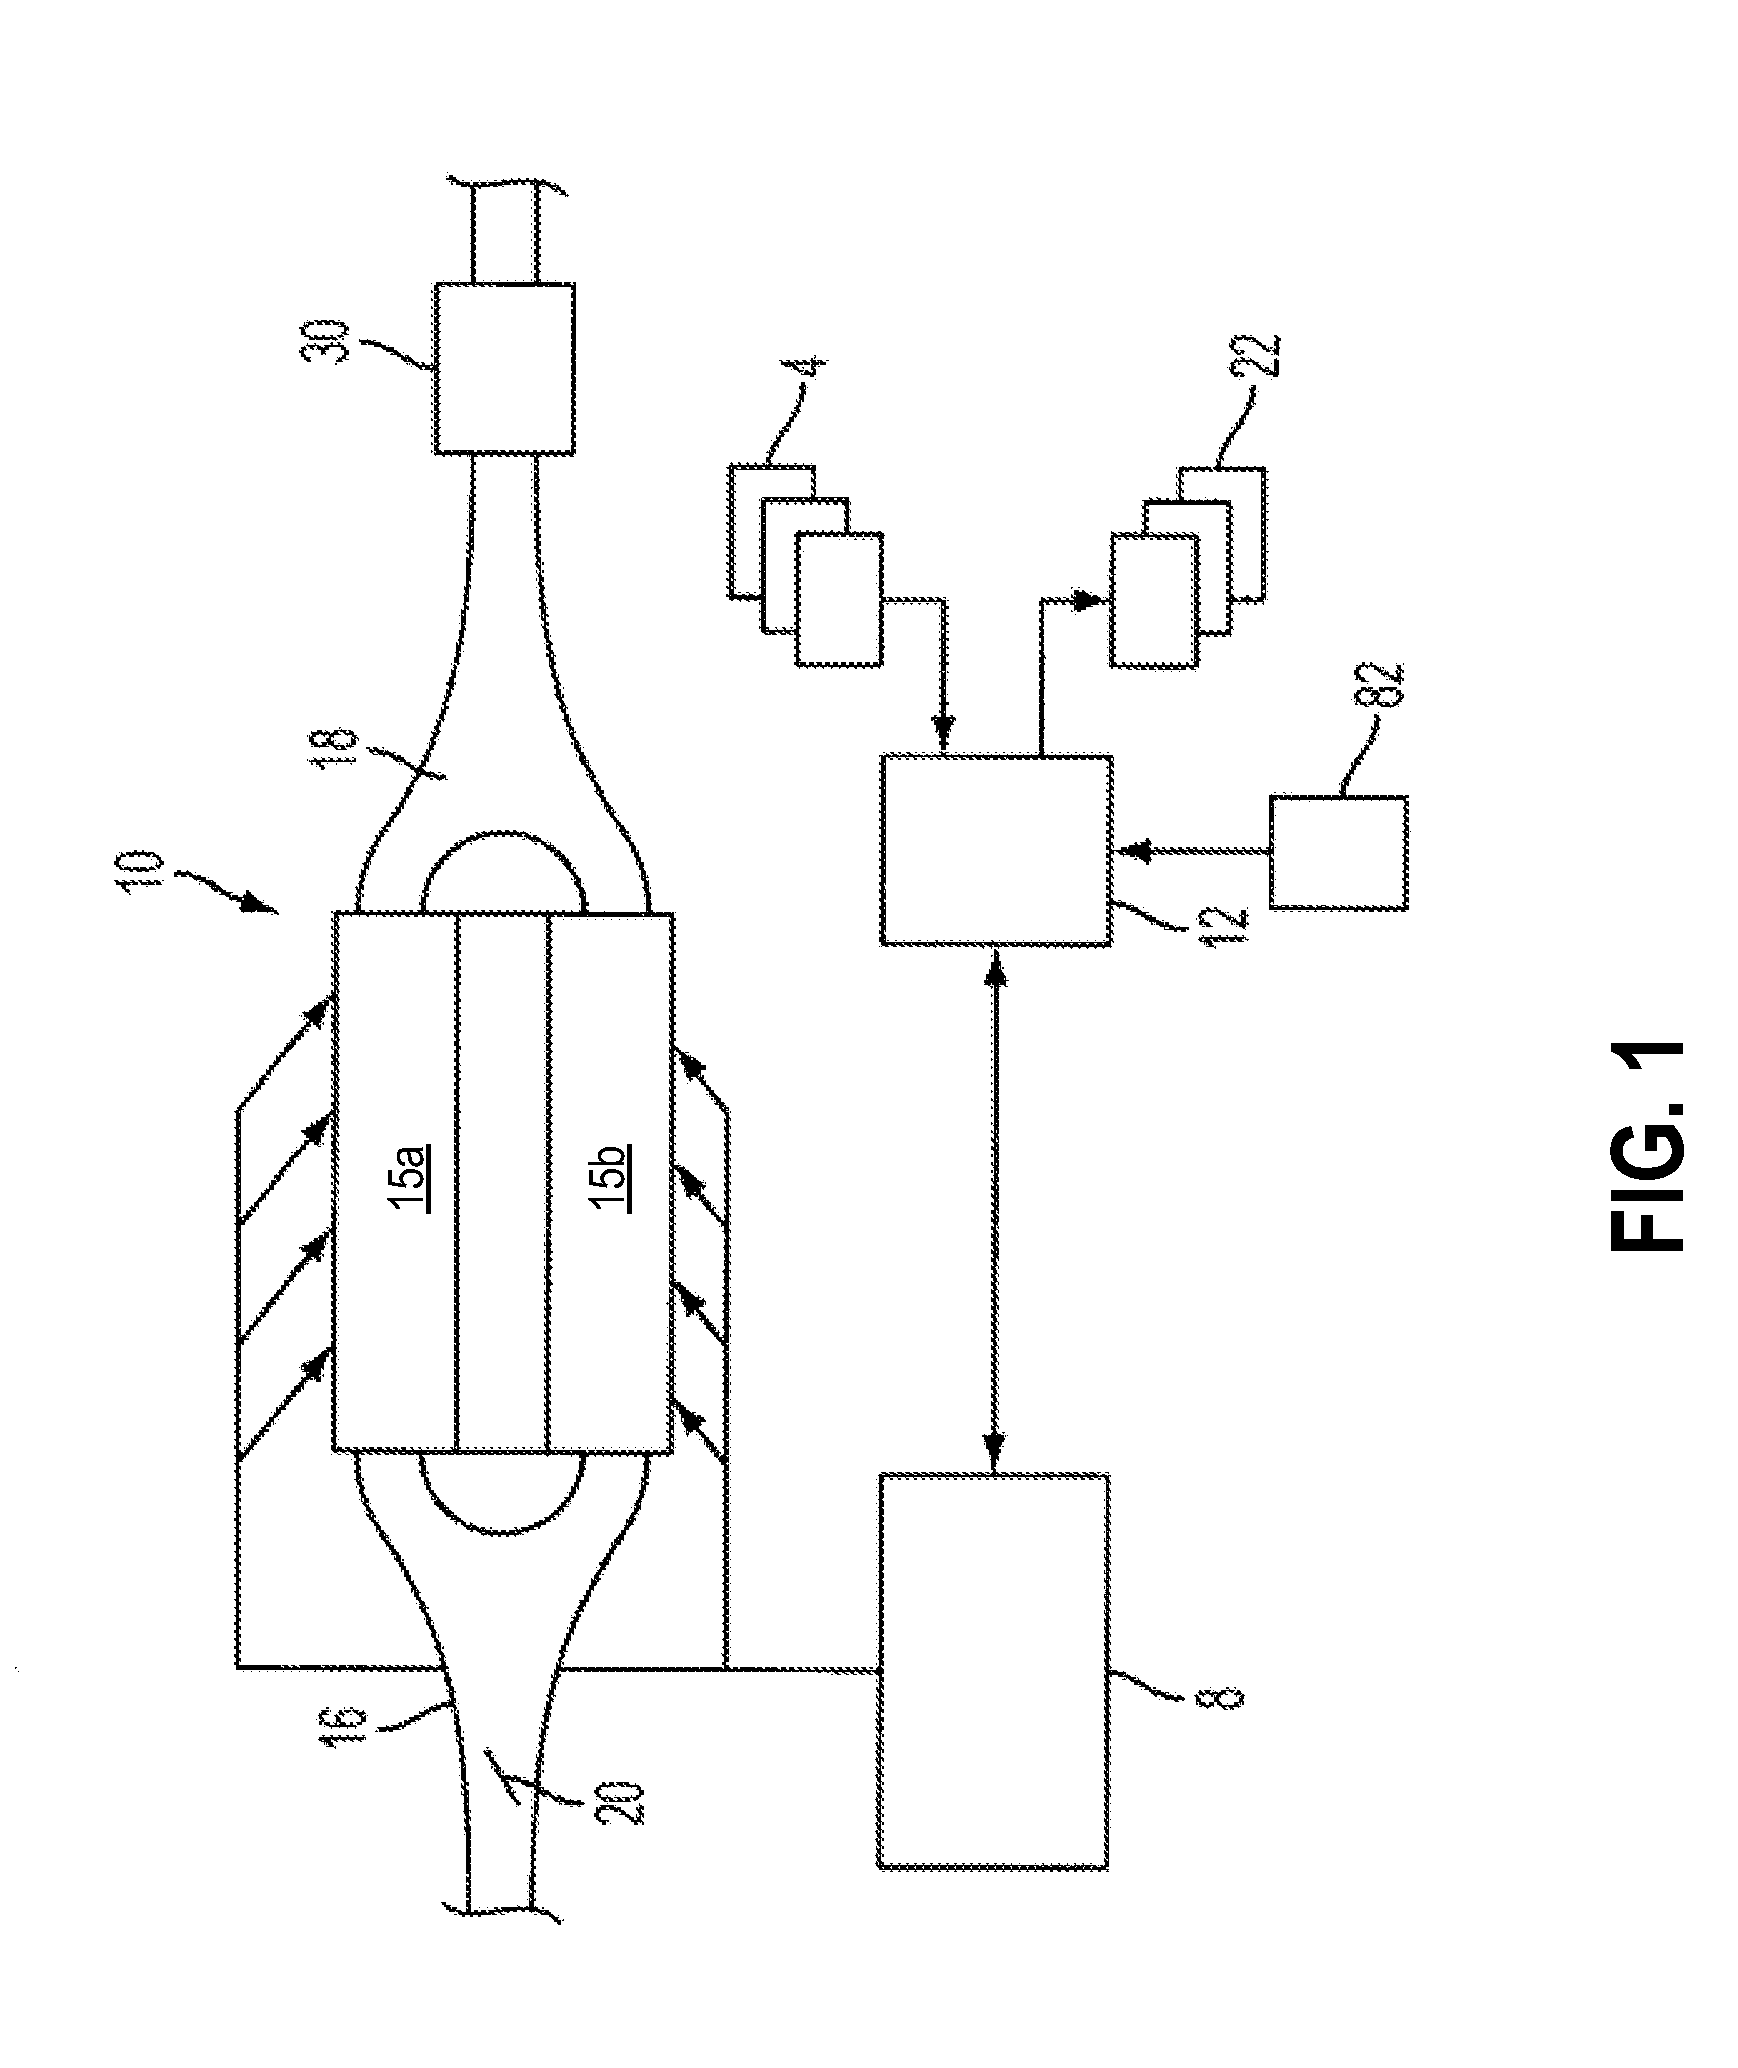 Methods and systems for pre-ignition control in a variable displacement engine